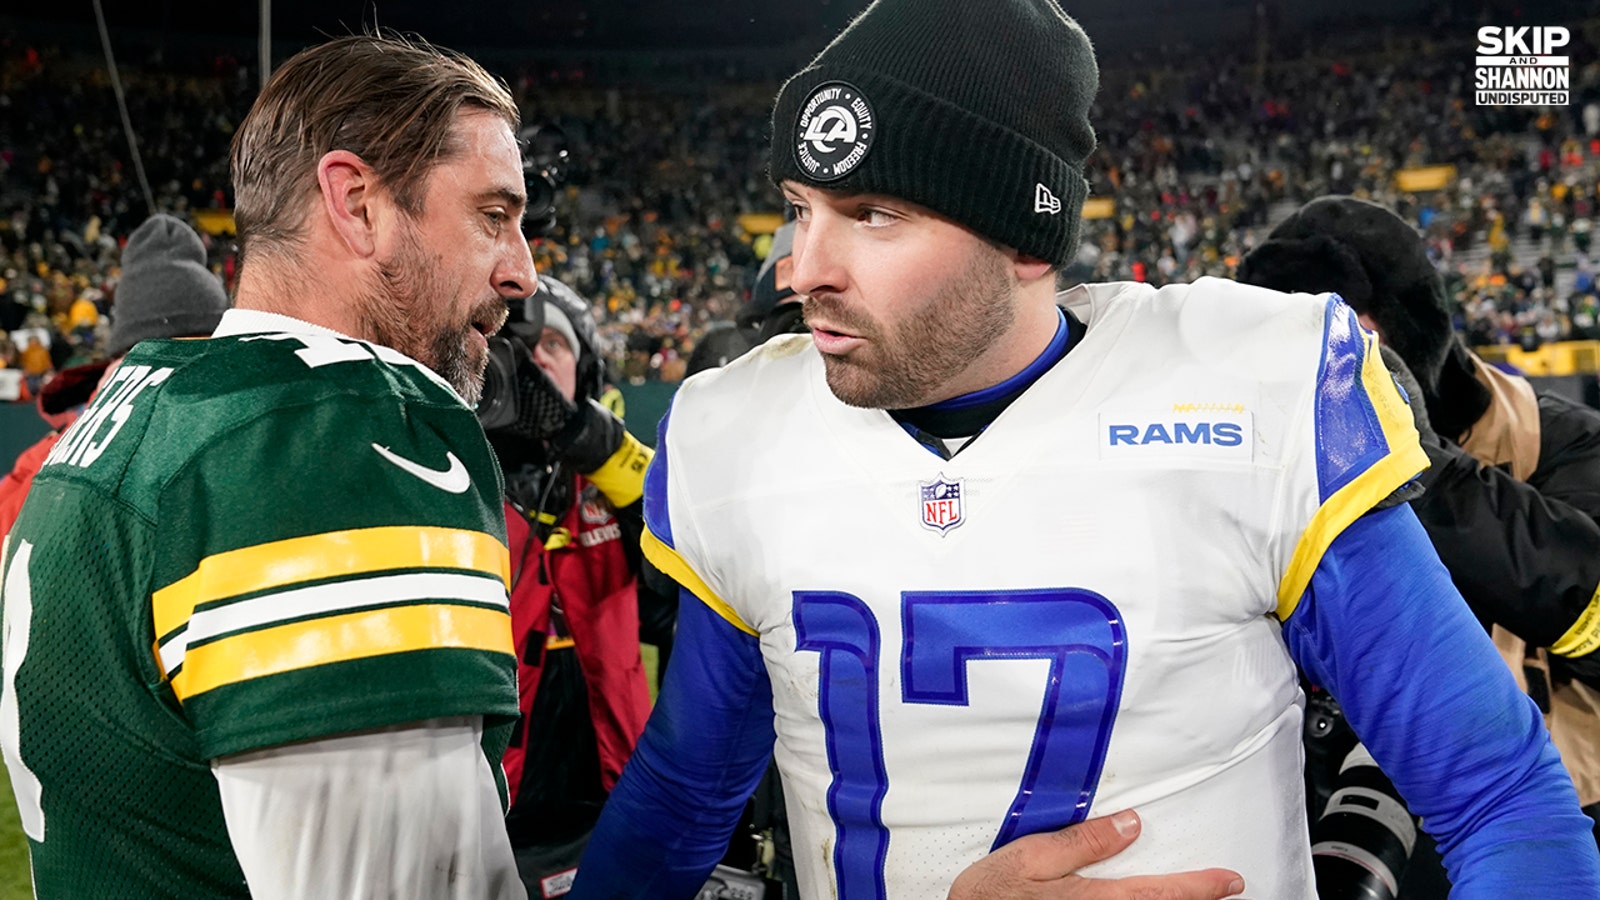 Aaron Rodgers leads Packers over Baker Mayfield, Rams